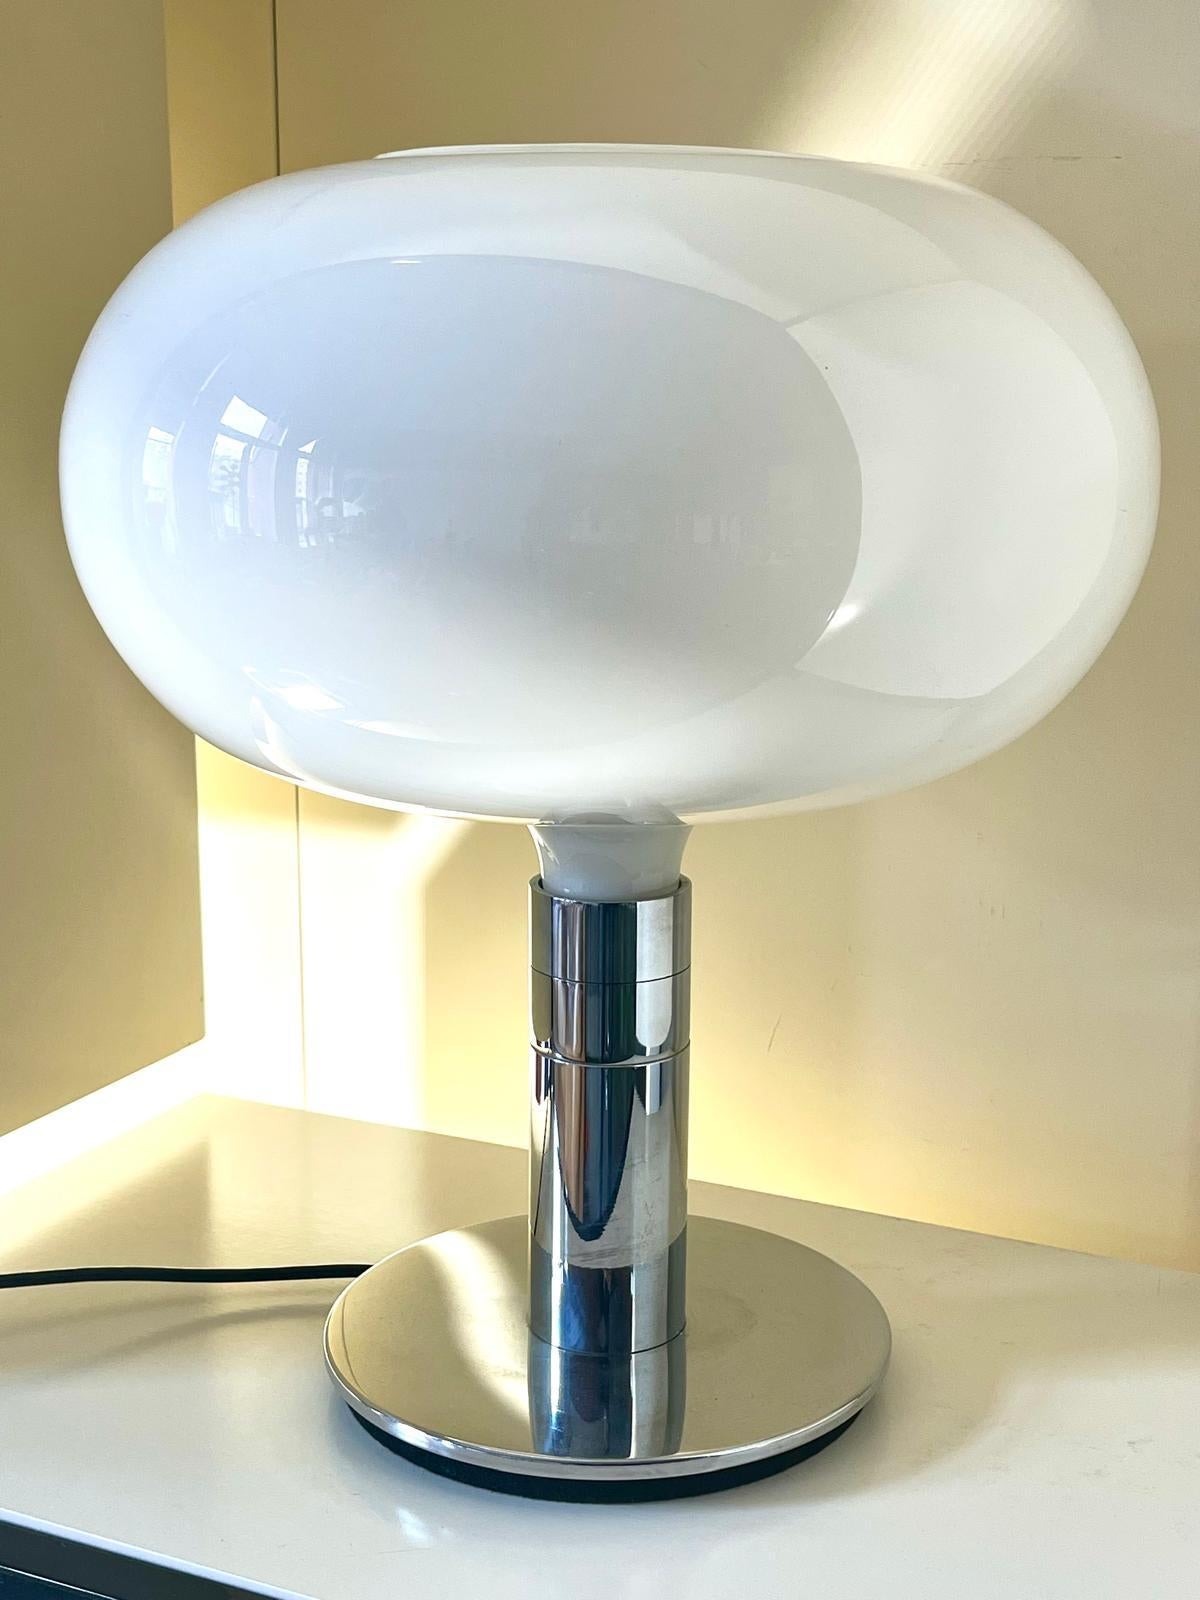 Chrome metal and Sirrah glass table lamp designed by Franco Albini and Franca Helg, 1970s.

Dimensions: Cm 50x 40 approx

Condition: excellent condition.